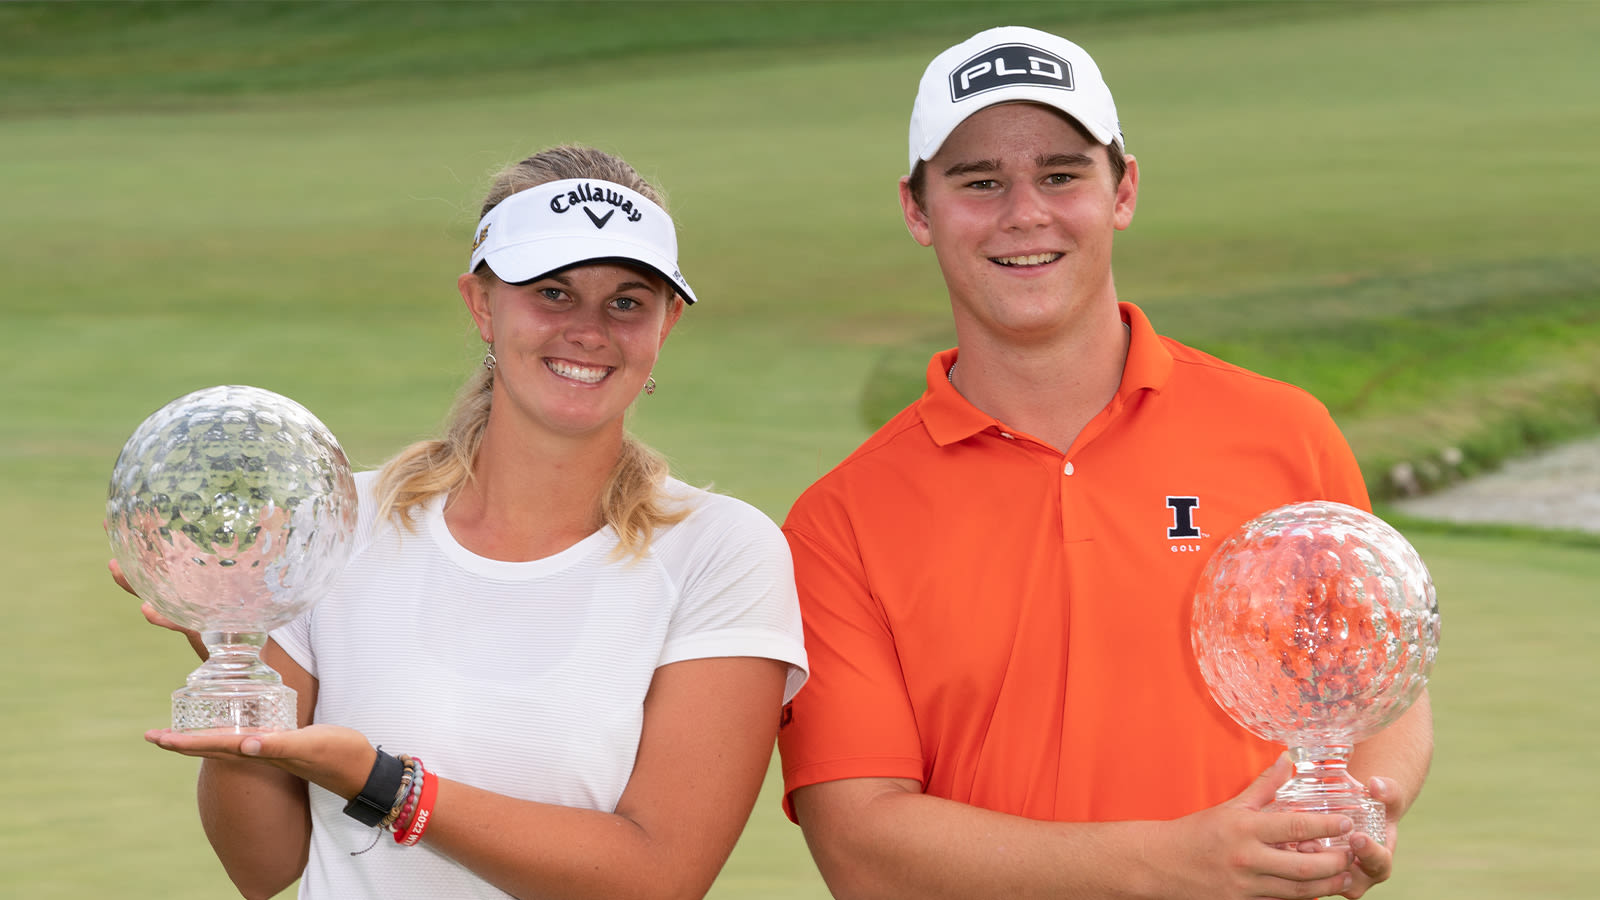 Junior PGA Champions, Kaitlyn Schroeder and Max Herendeen pose with the Patty Berg Trophy and Jack Nicklaus Trophy after the final round for the 46th Boys and Girls Junior PGA Championship held at Cog Hill Golf & Country Club on August 5, 2022 in Lemont, Illinois. (Photo by Hailey Garrett/PGA of America)